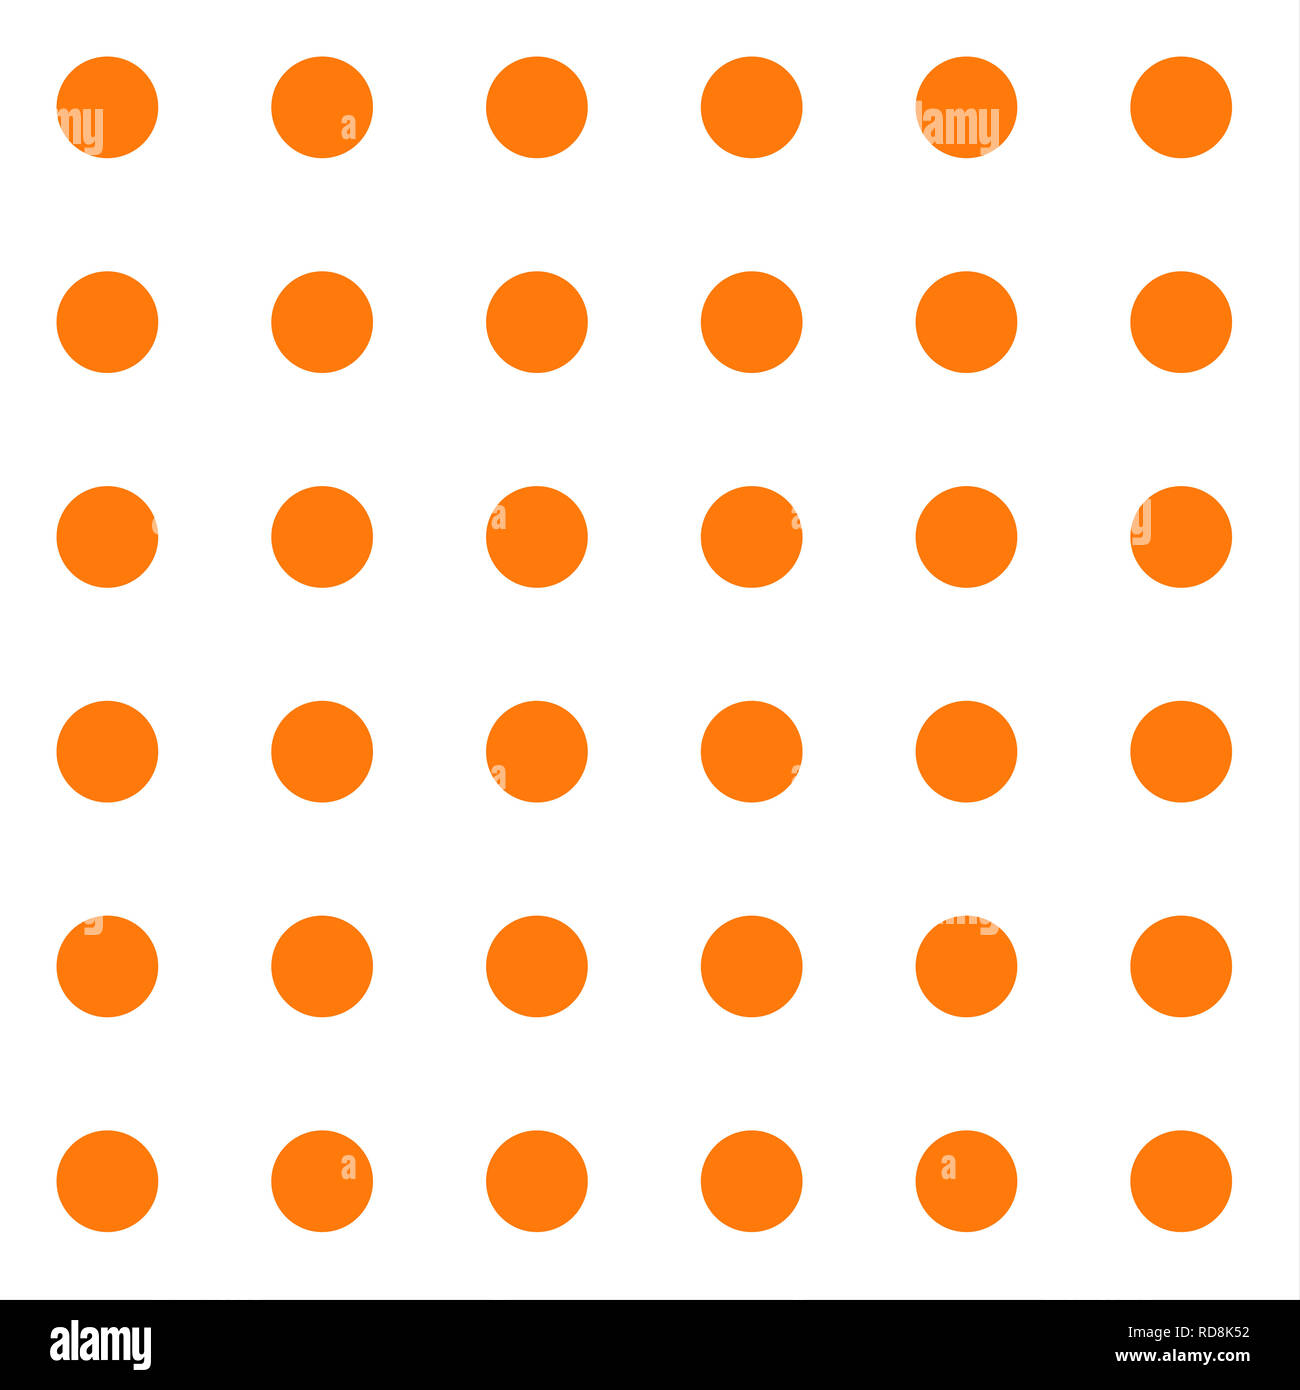 Seamless repeating pattern of big orange dots on a white background Stock Photo